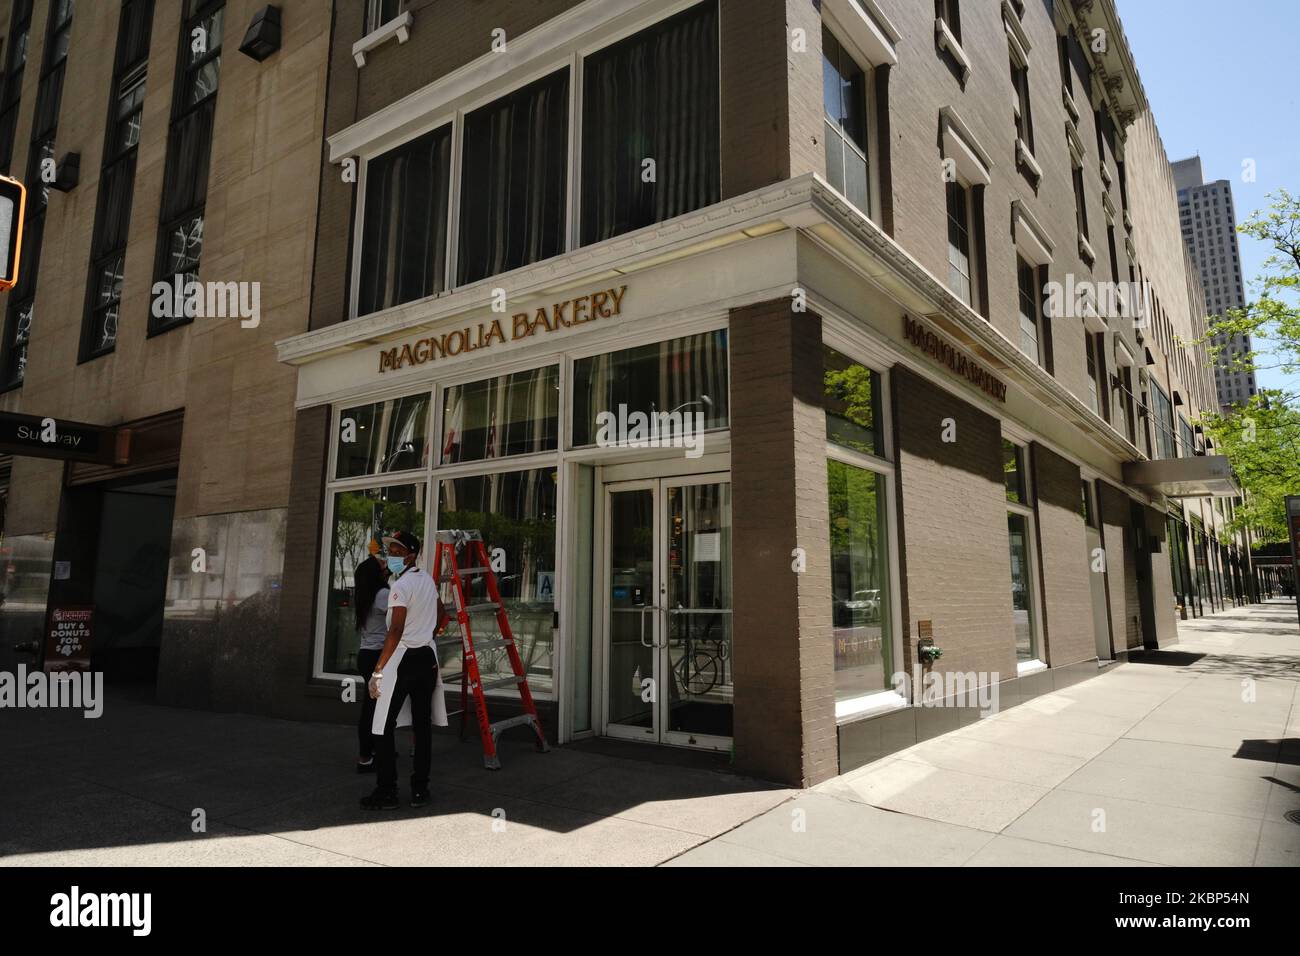 A view of Magnolia’s Bakery during the coronavirus pandemic on May 20, 2020 in 5th Ave., New York City. COVID-19 has spread to most countries around the world, claiming over 316,000 lives with over 4.8 million infections reported. Magnolia Bakery Is Experimenting With New Light Tech That Supposedly Safely Kills Viruses. (Photo by John Nacion/NurPhoto) Stock Photo